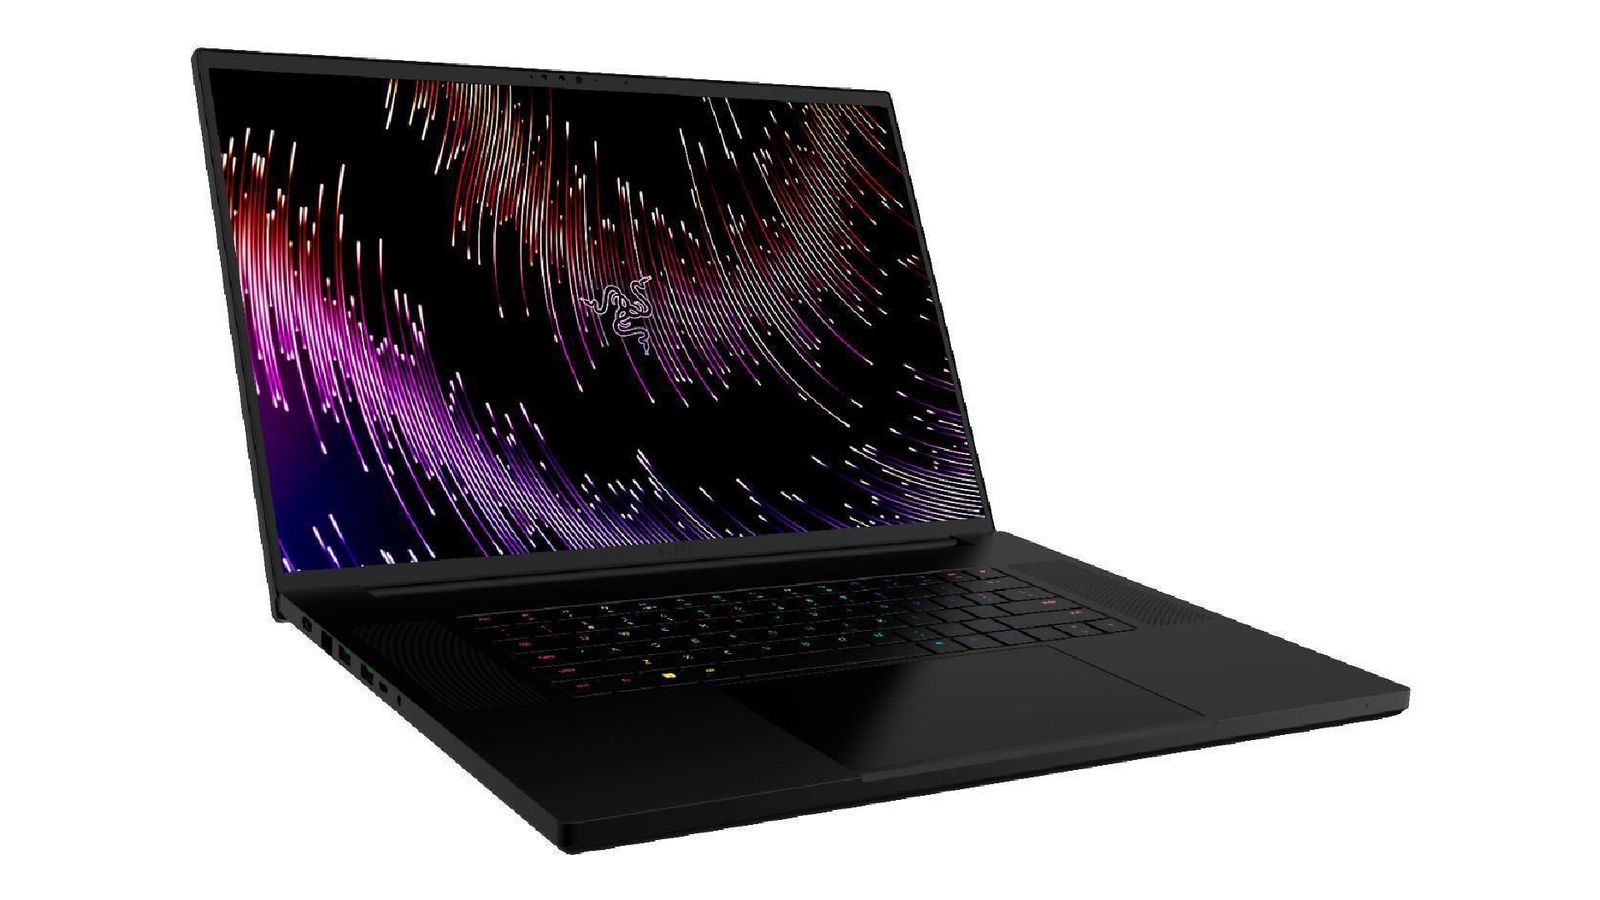 Razer Blade 18 product image of a black laptop with a red, pink, and purple pattern featuring Razer branding on the display.